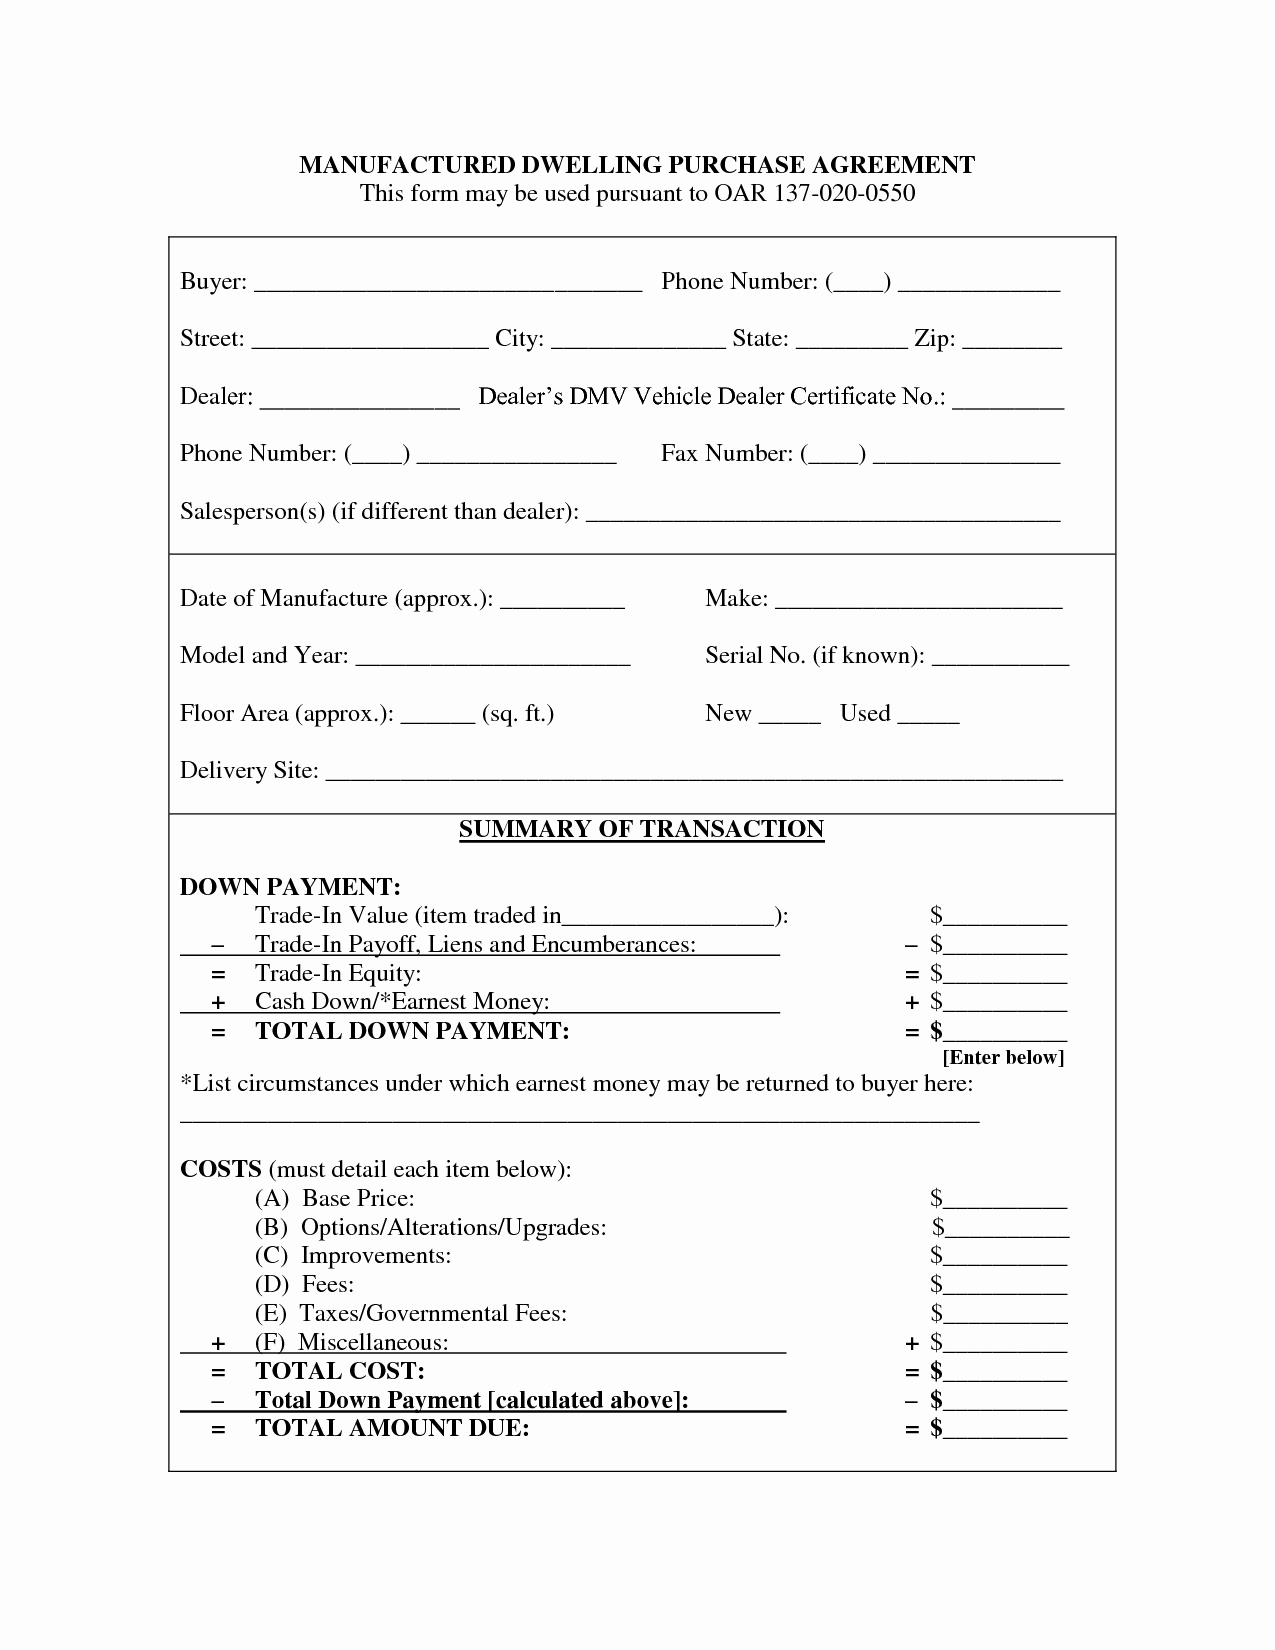 Vehicle Purchase order Template Elegant Free Contract Agreement forms for Vehicles Purchase Agreement forms